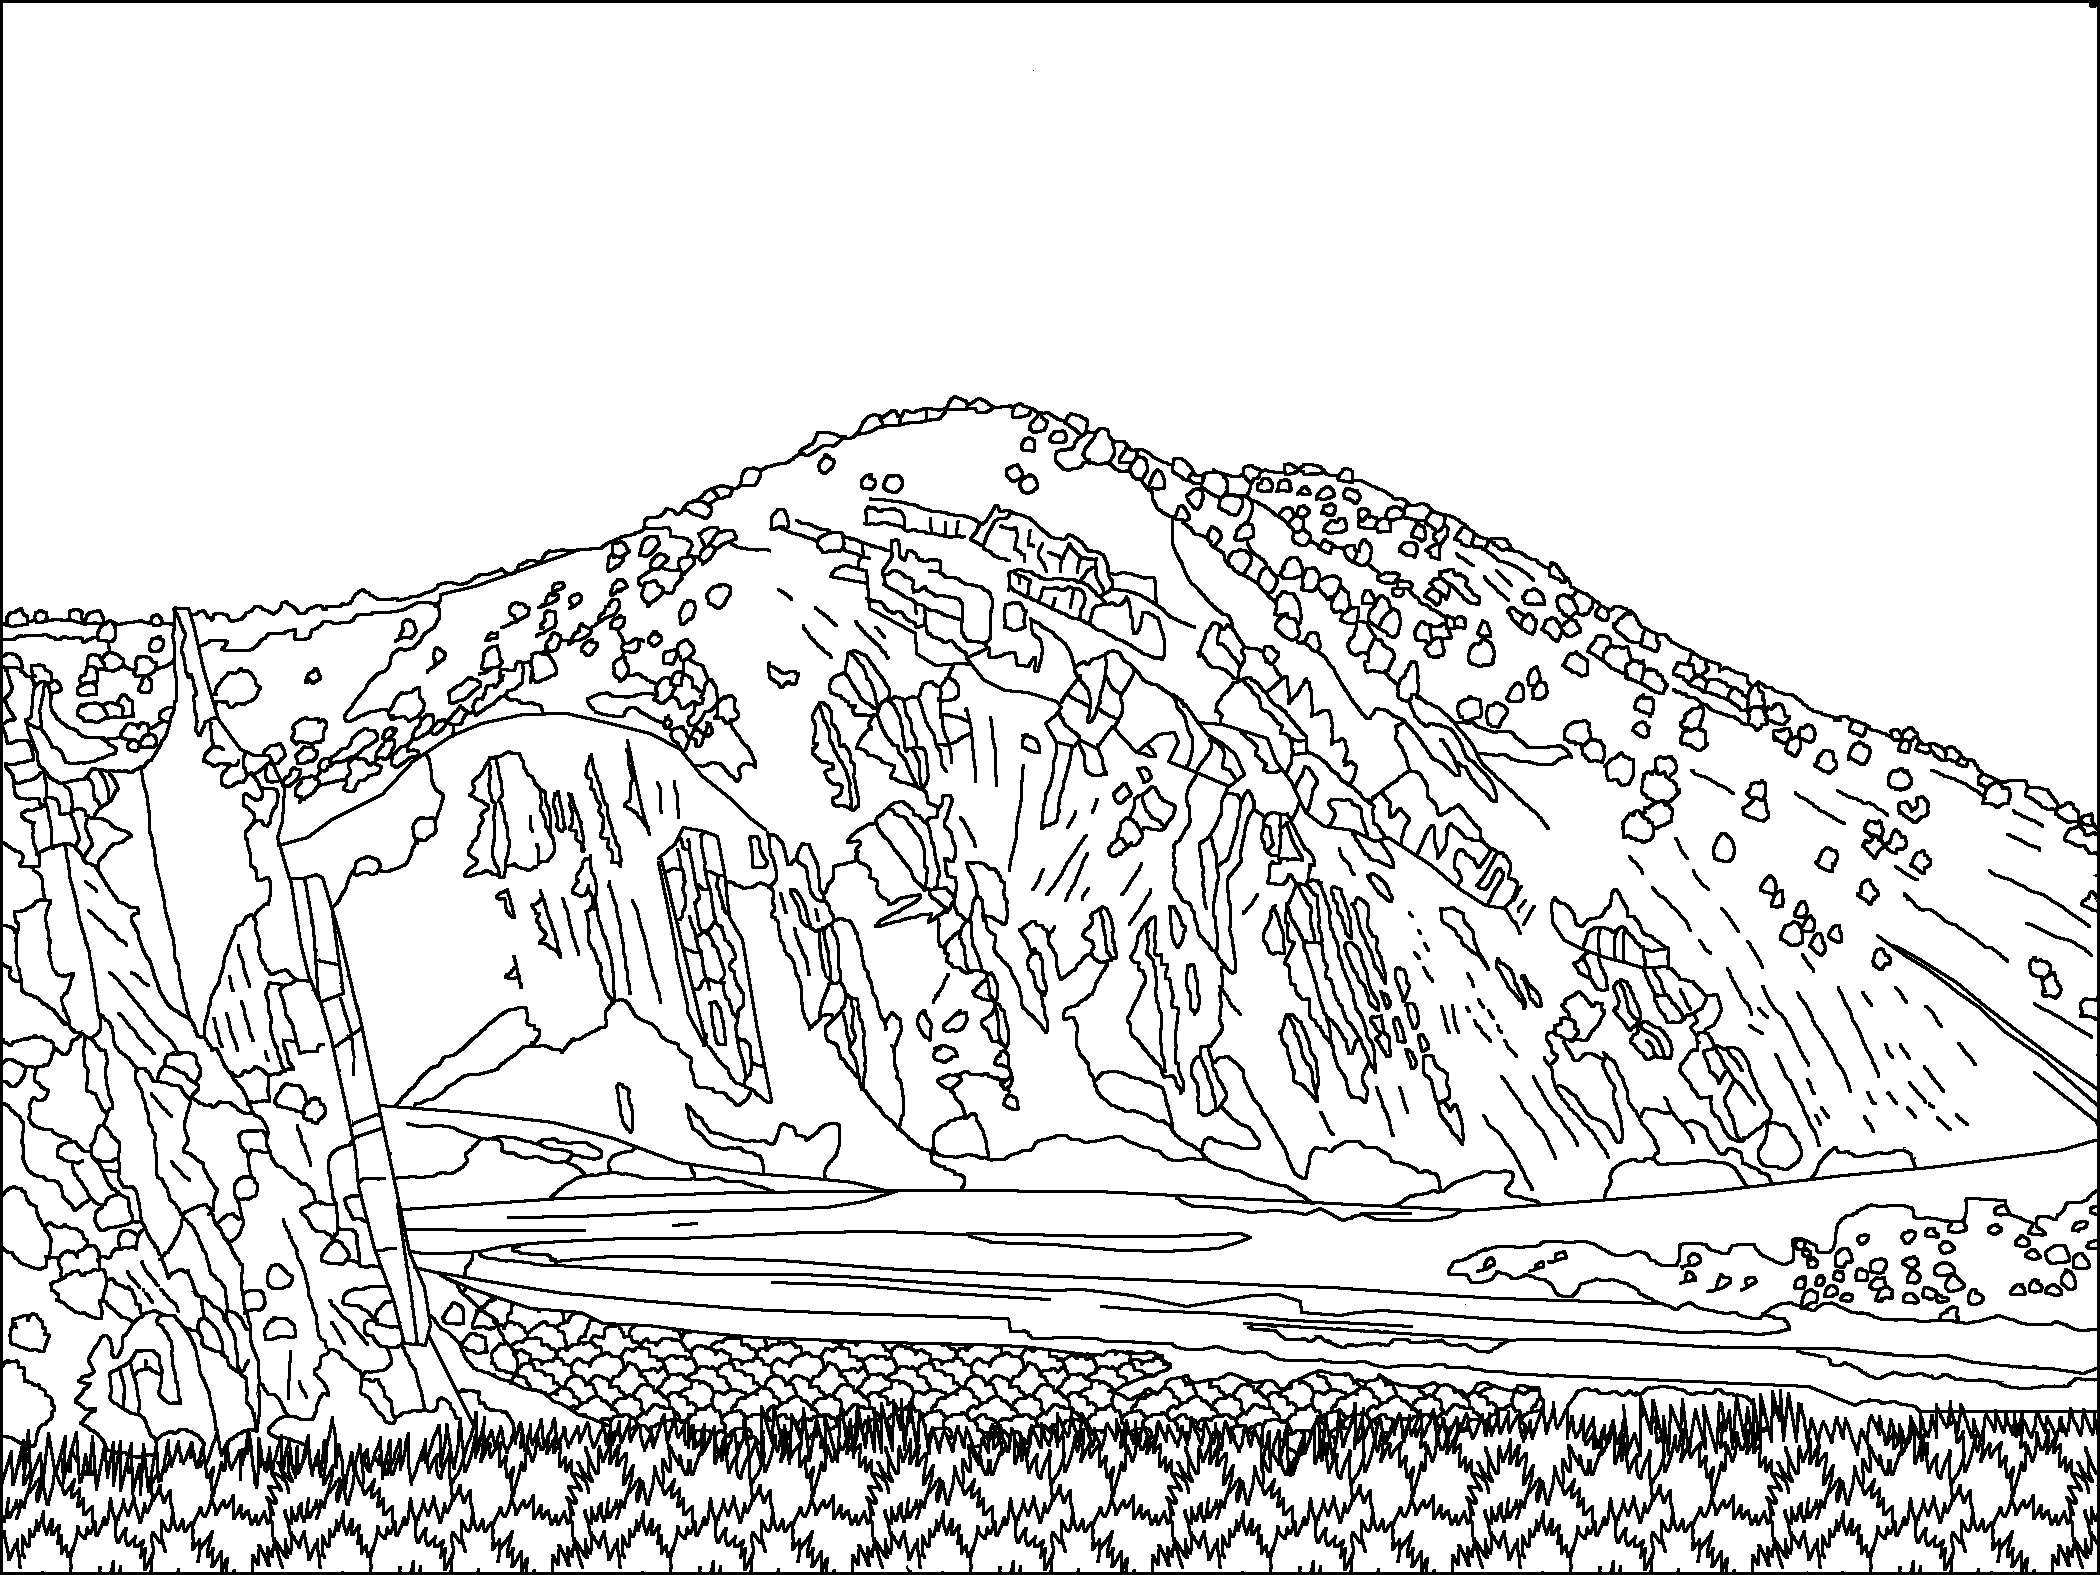 Sierra Nevada Mountains coloring #12, Download drawings